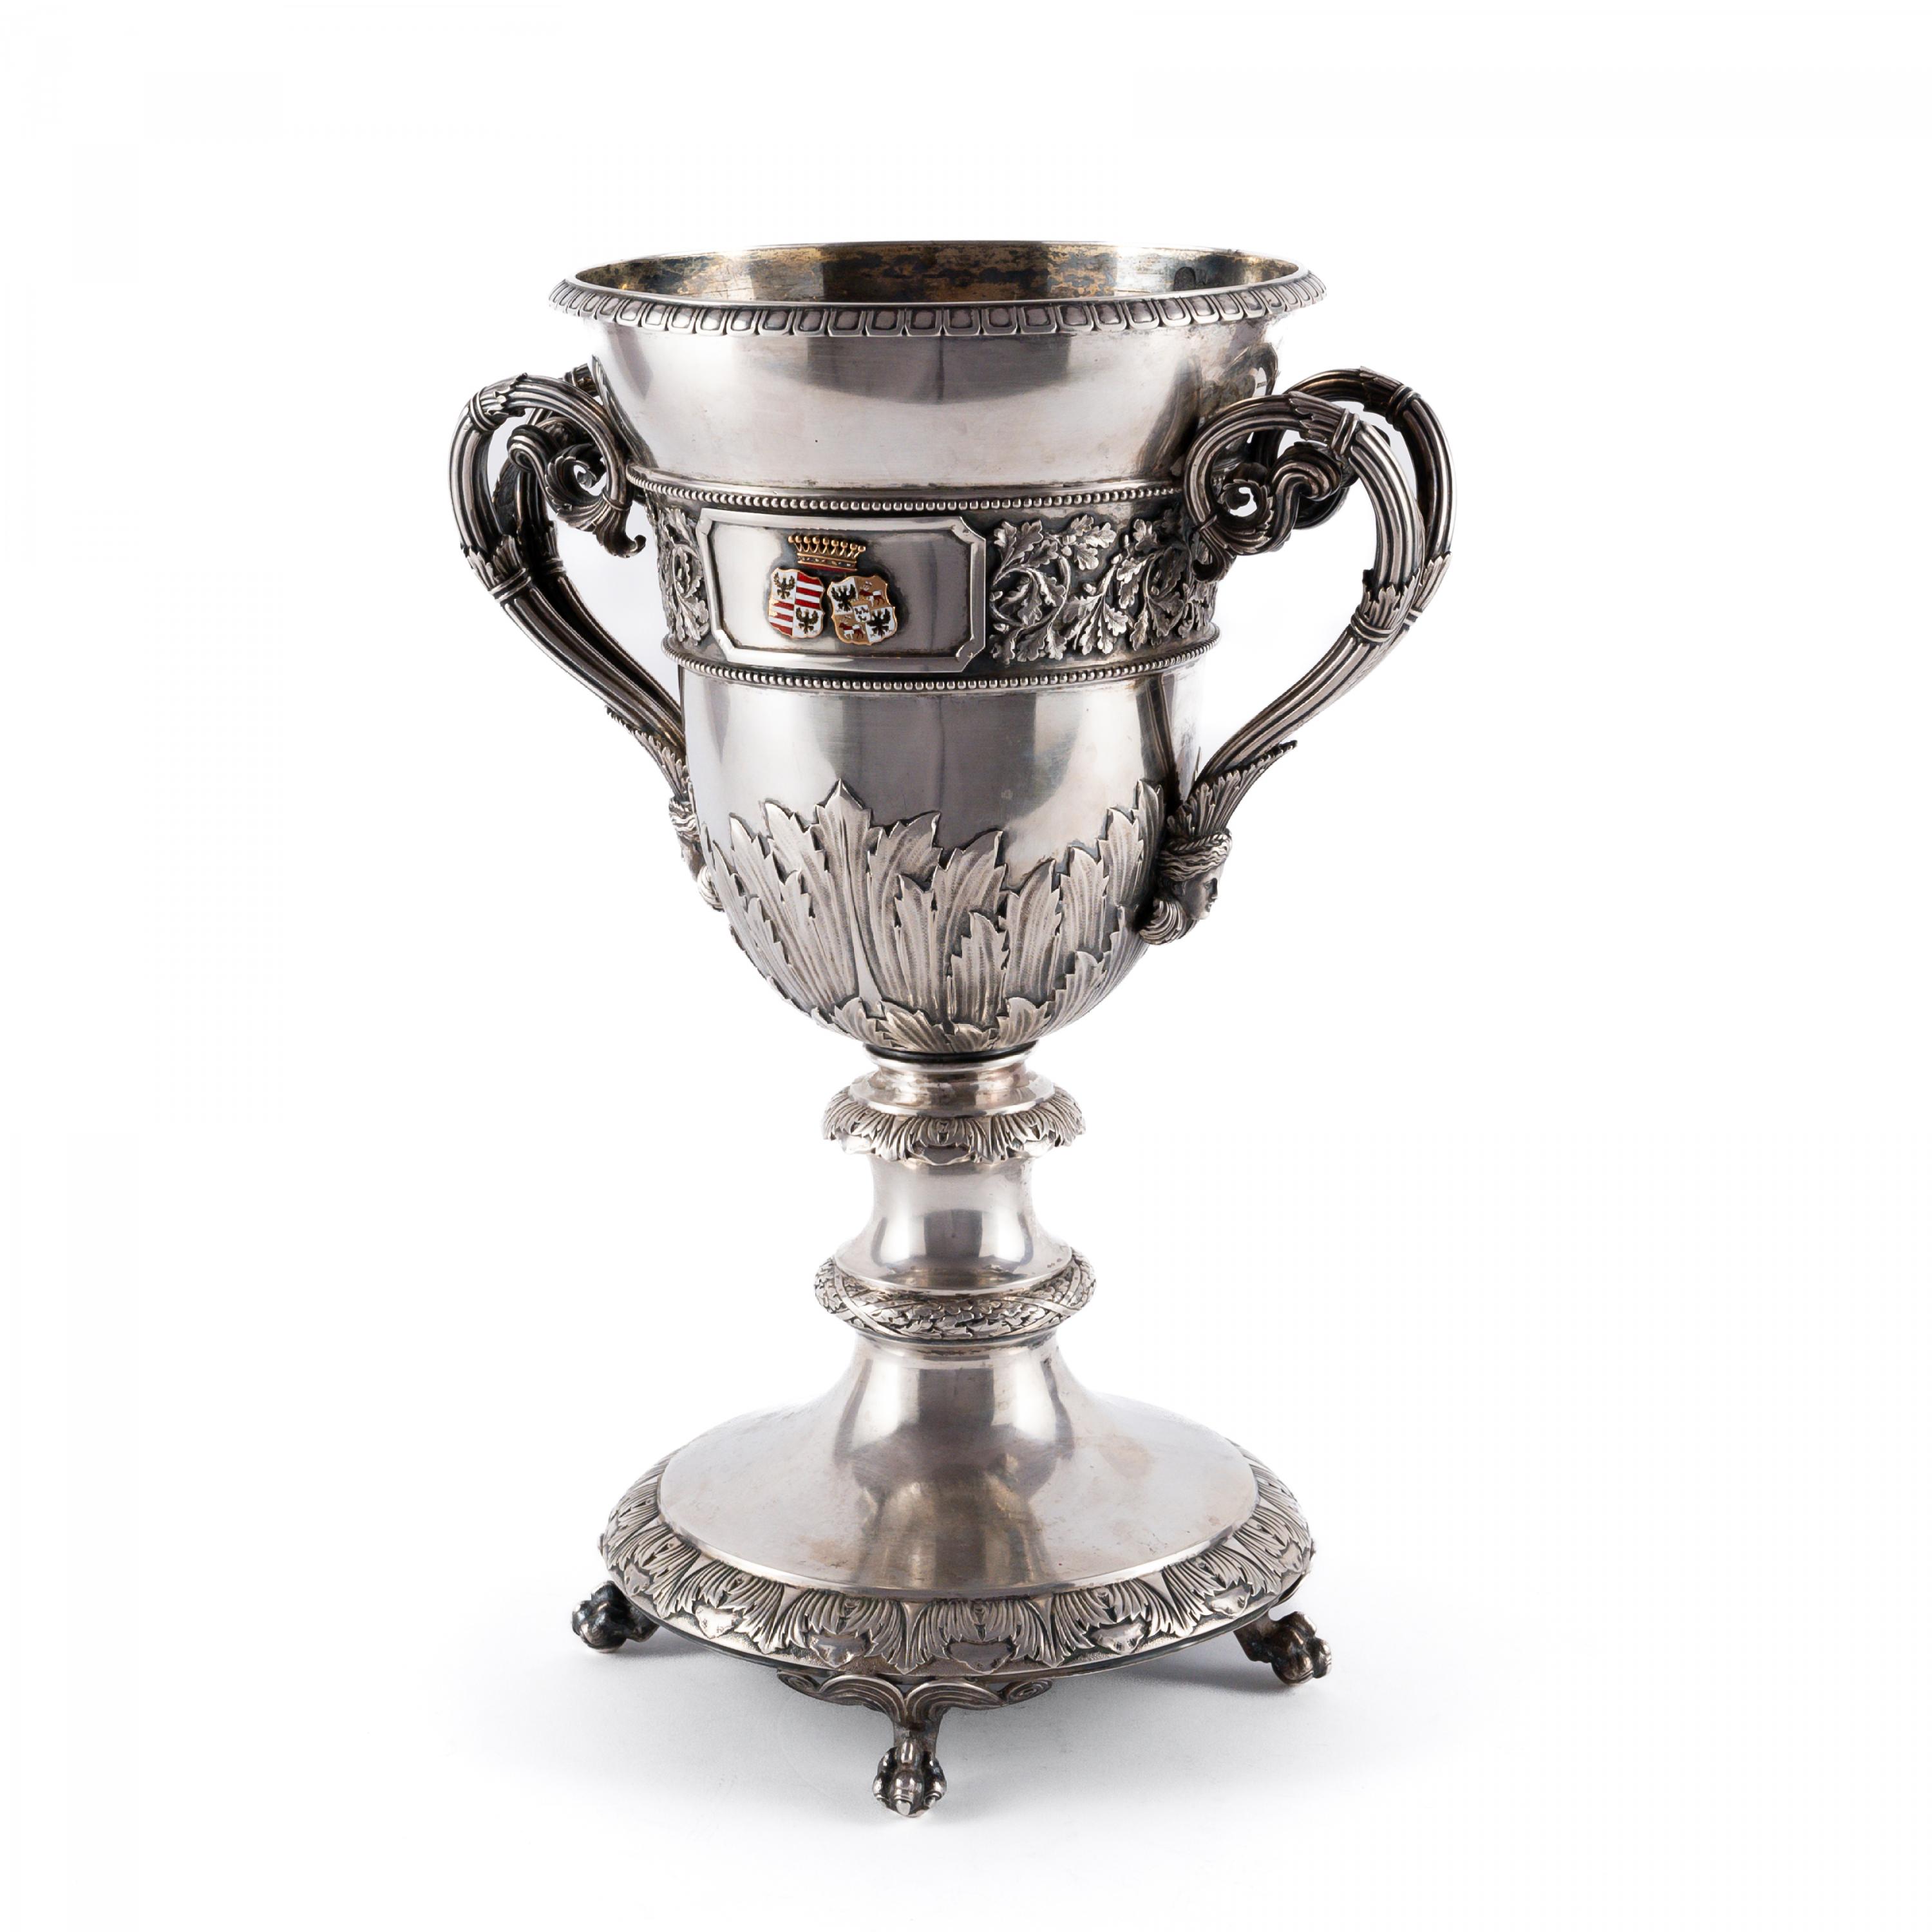 MAGNIFICENT SILVER DOUBLE HANDLED GOBLET WITH DEDICATION FOR THE SILVER WEDDING ANNIVERSARY OF COUNT - Image 2 of 7